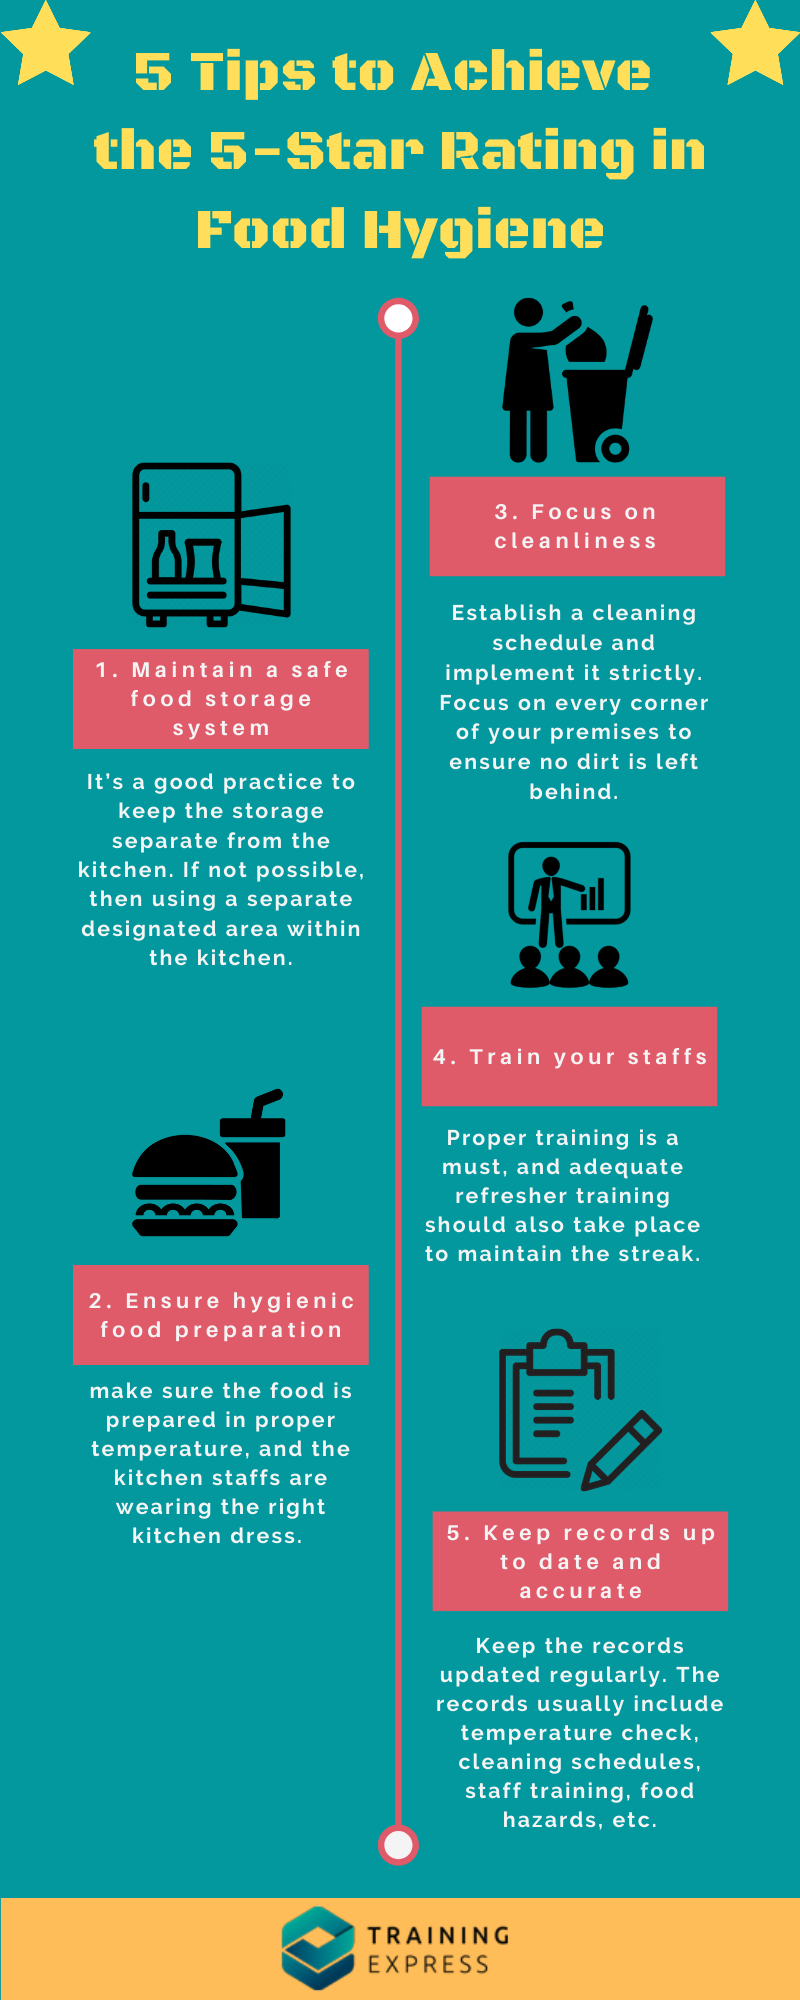 5 Tips to Achieve the 5-Star Rating in Food Hygiene